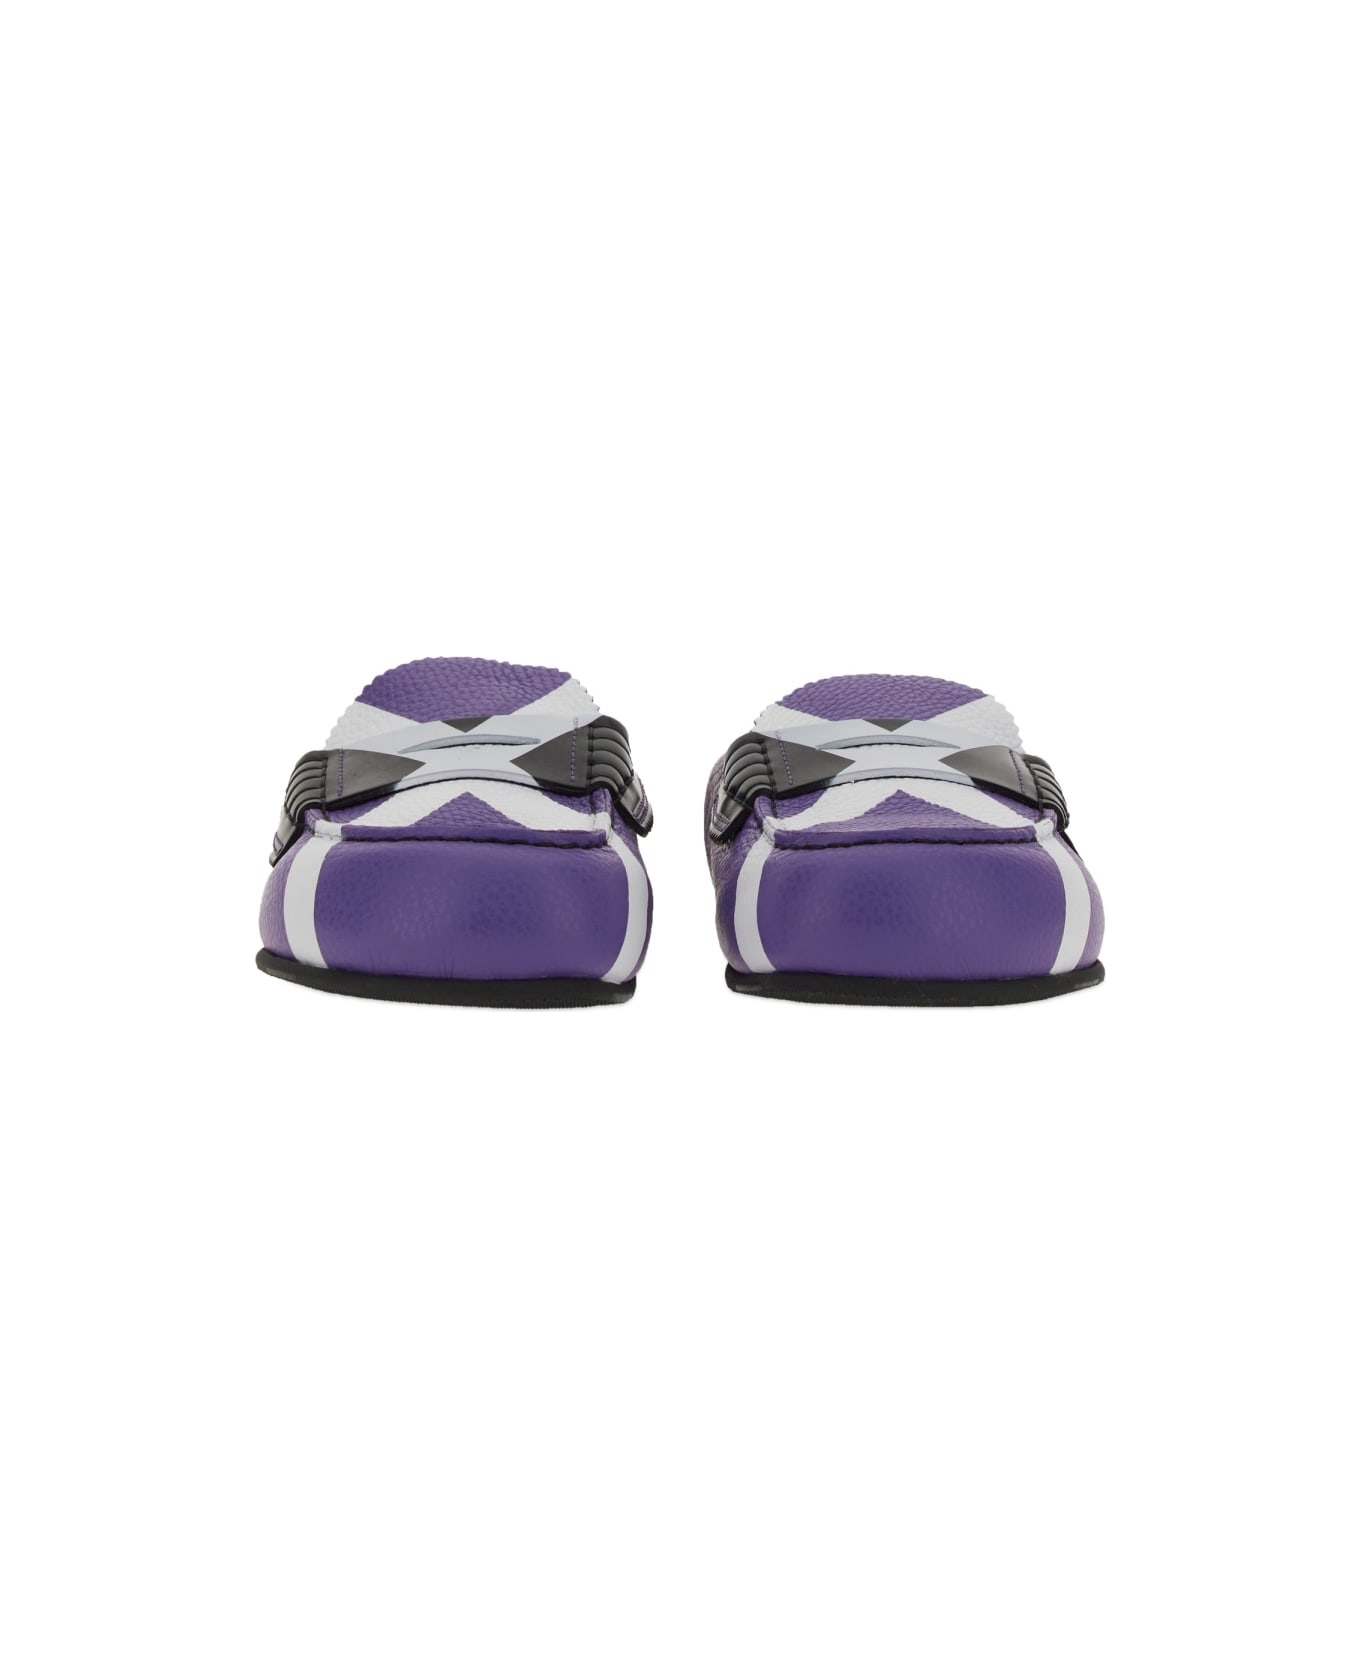 College Sabot With Iconic "x" - PURPLE